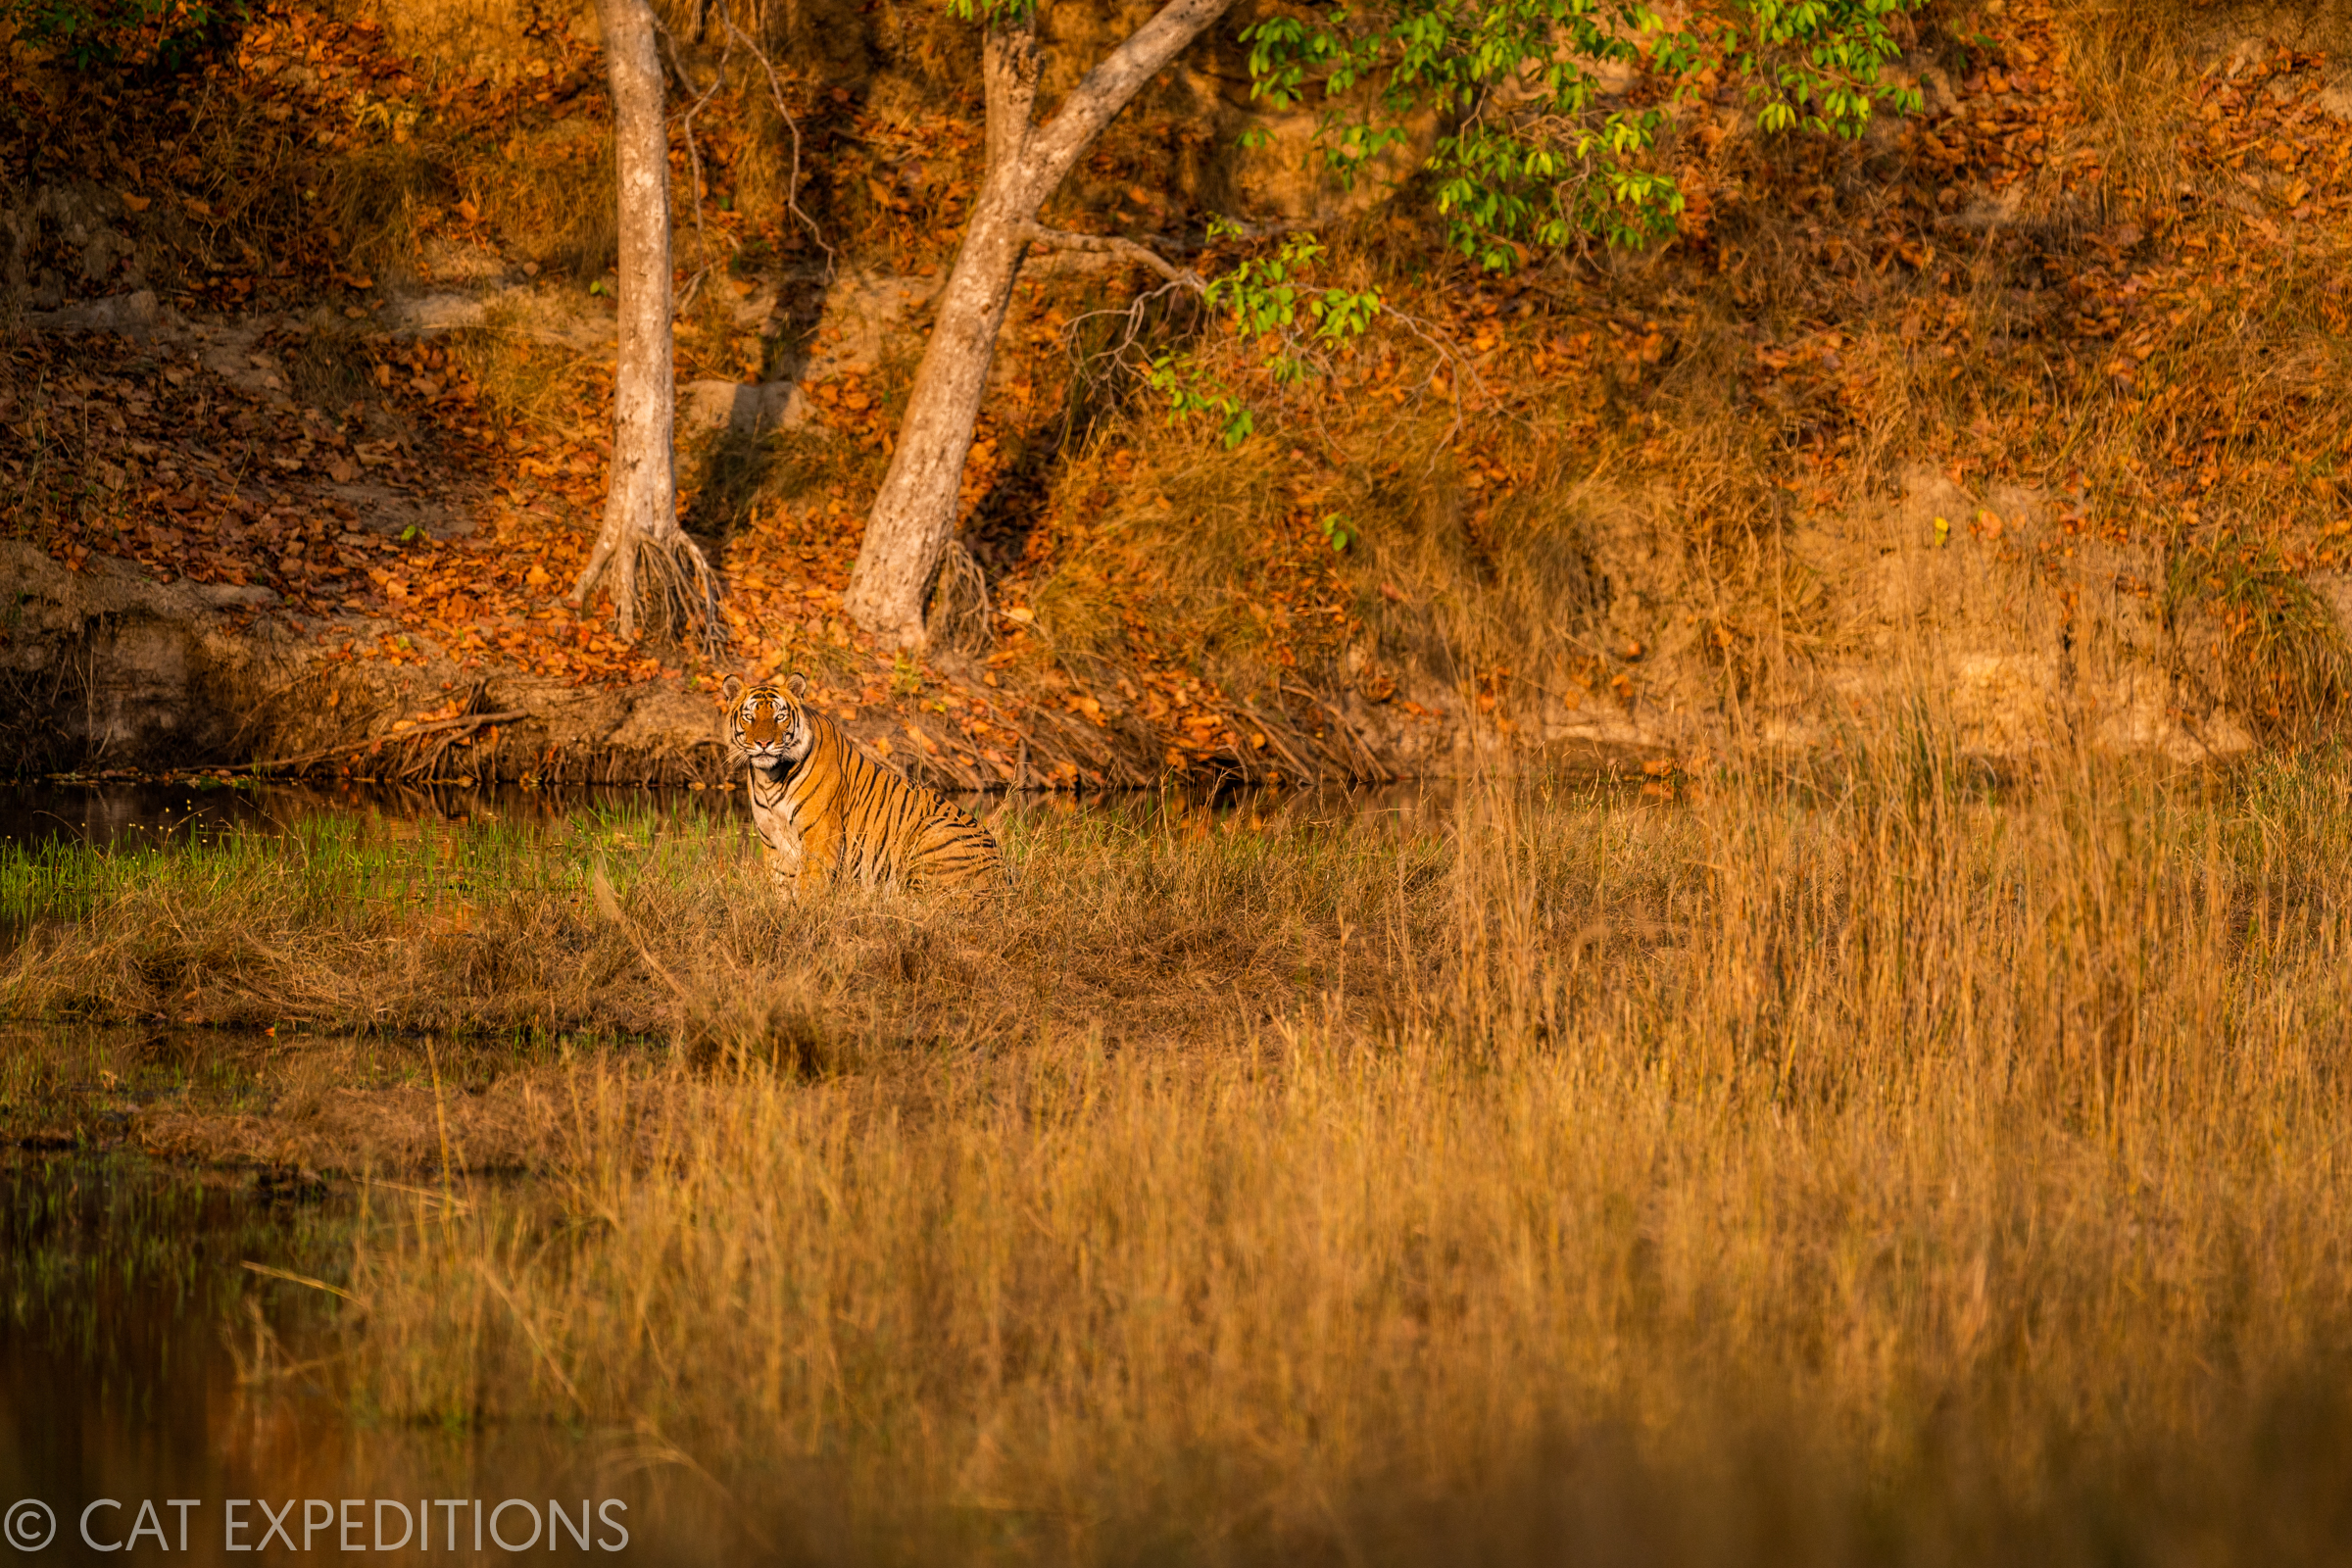 Male Tiger next to waterhole in India